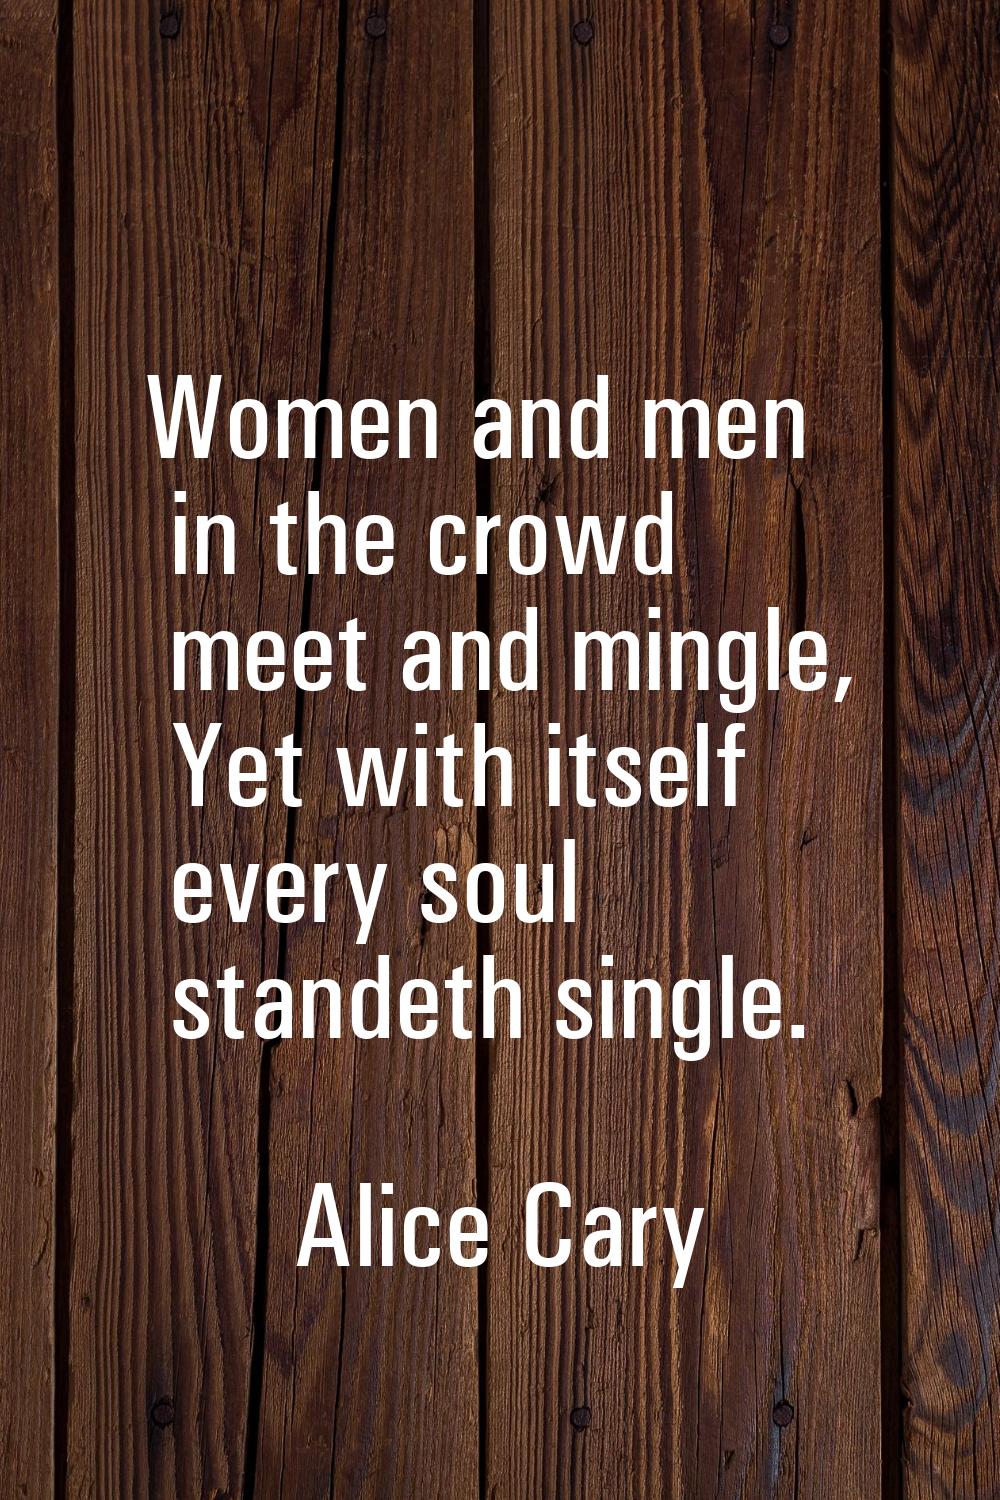 Women and men in the crowd meet and mingle, Yet with itself every soul standeth single.